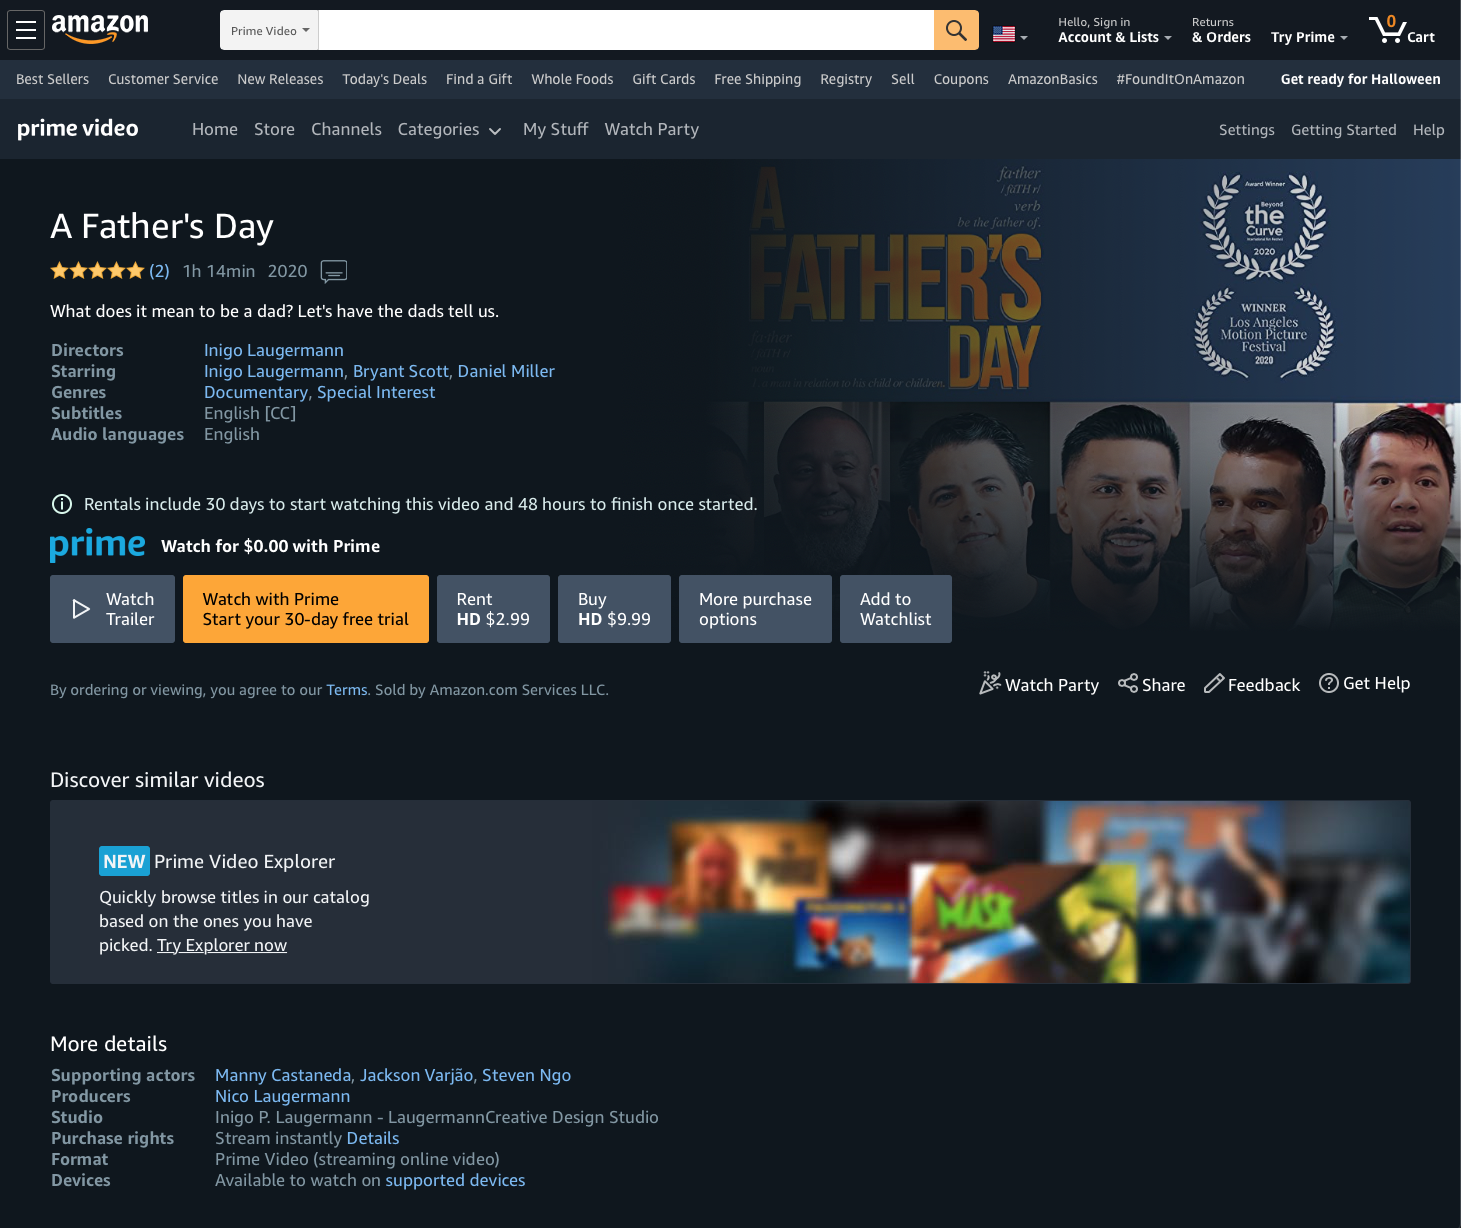 "A Father's Day" is on Prime Video